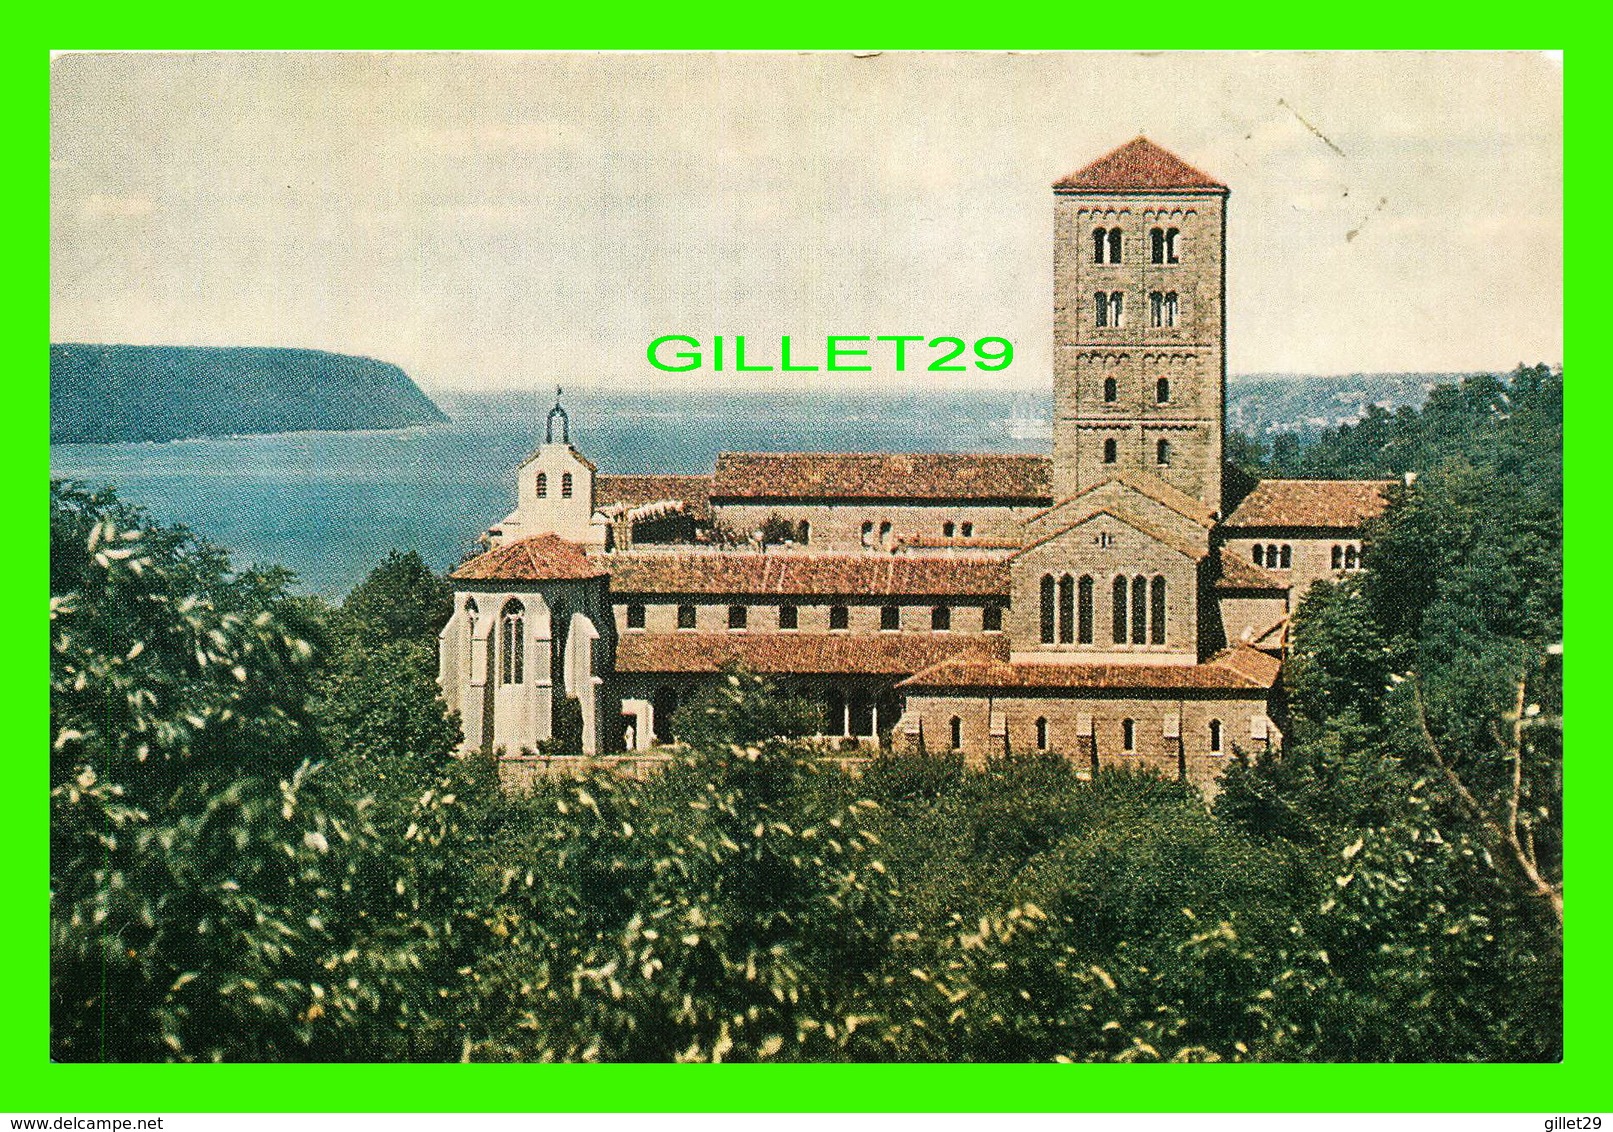 FORT TRYON PARK, NY - THE CLOISTERS - THE METROPOLITAN MUSEUM OF ART - - Parchi & Giardini